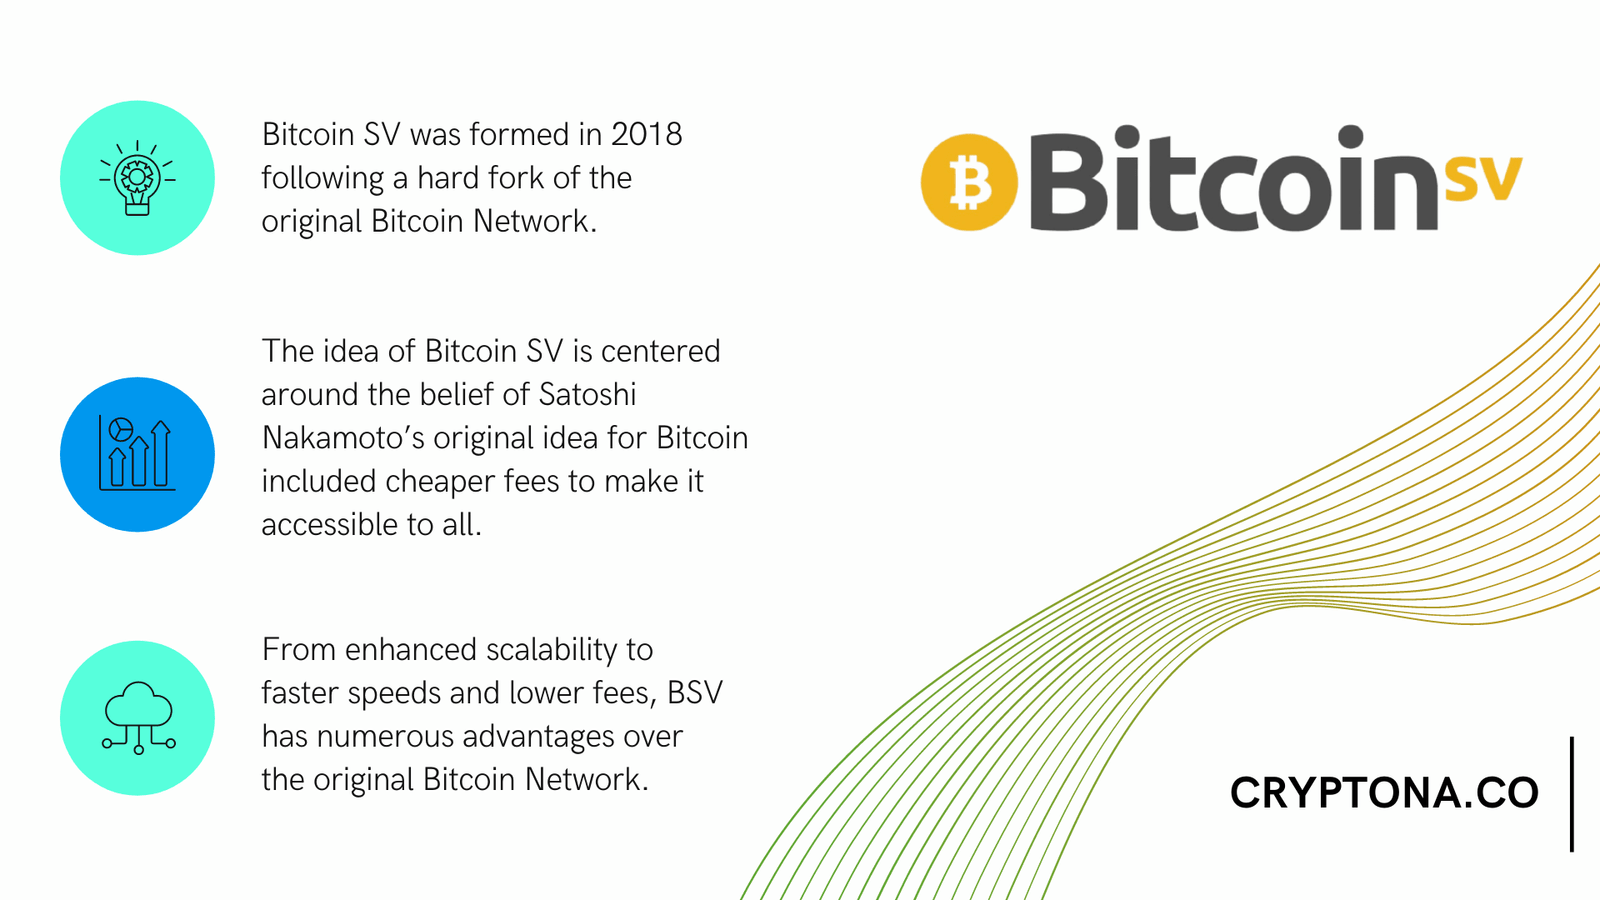 What is Bitcoin SV?